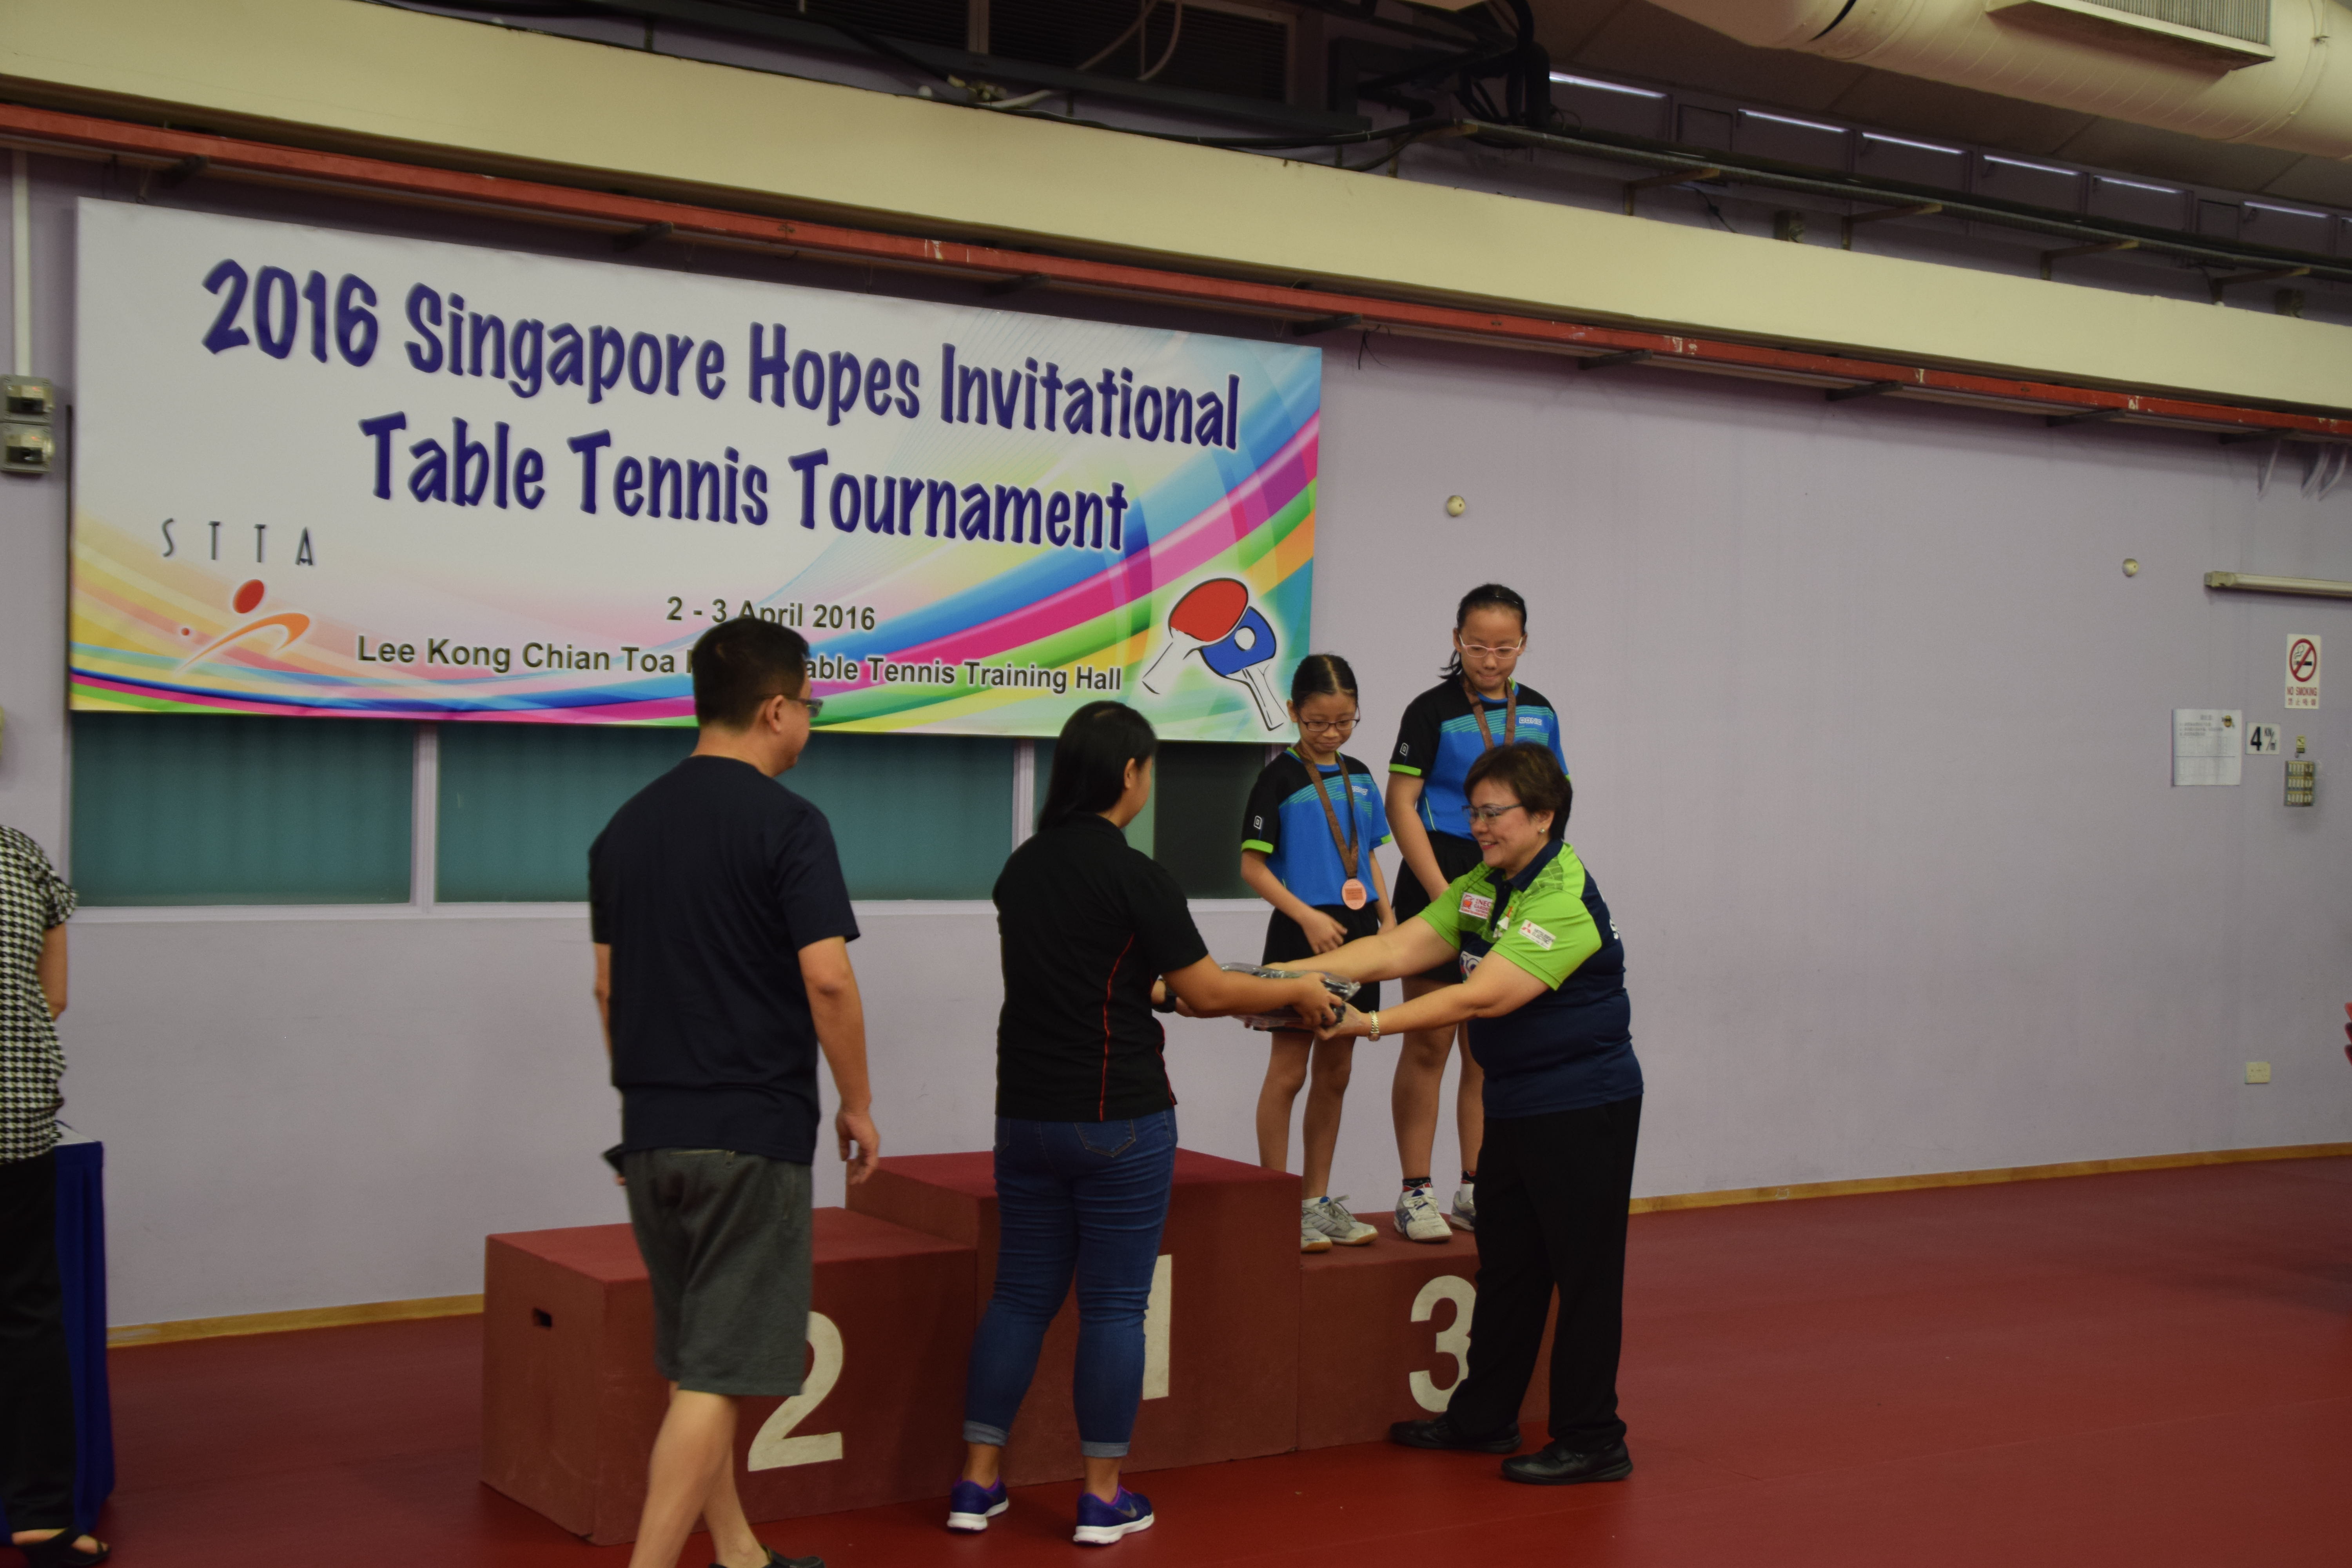 Singapore Hopes Invitational Table Tennis Tournament 2016 in conjunction with The World Table Tennis Day